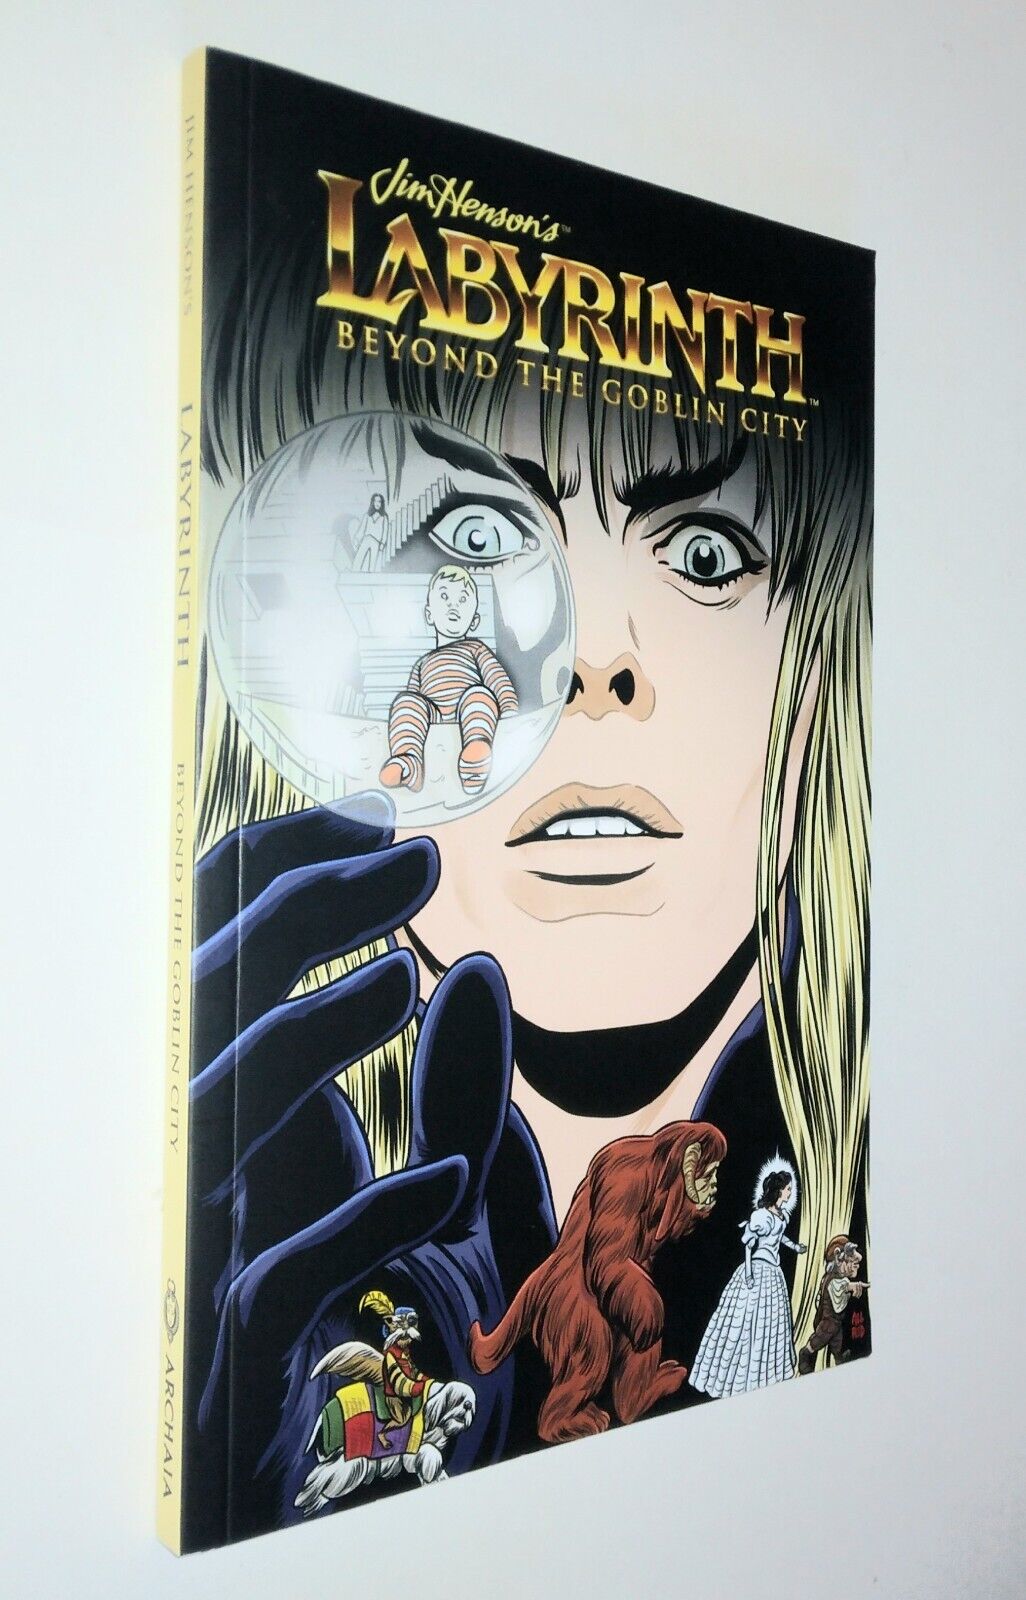 Jim Henson's Labyrinth: Complete Short Story Collection: Beyond the Goblin City